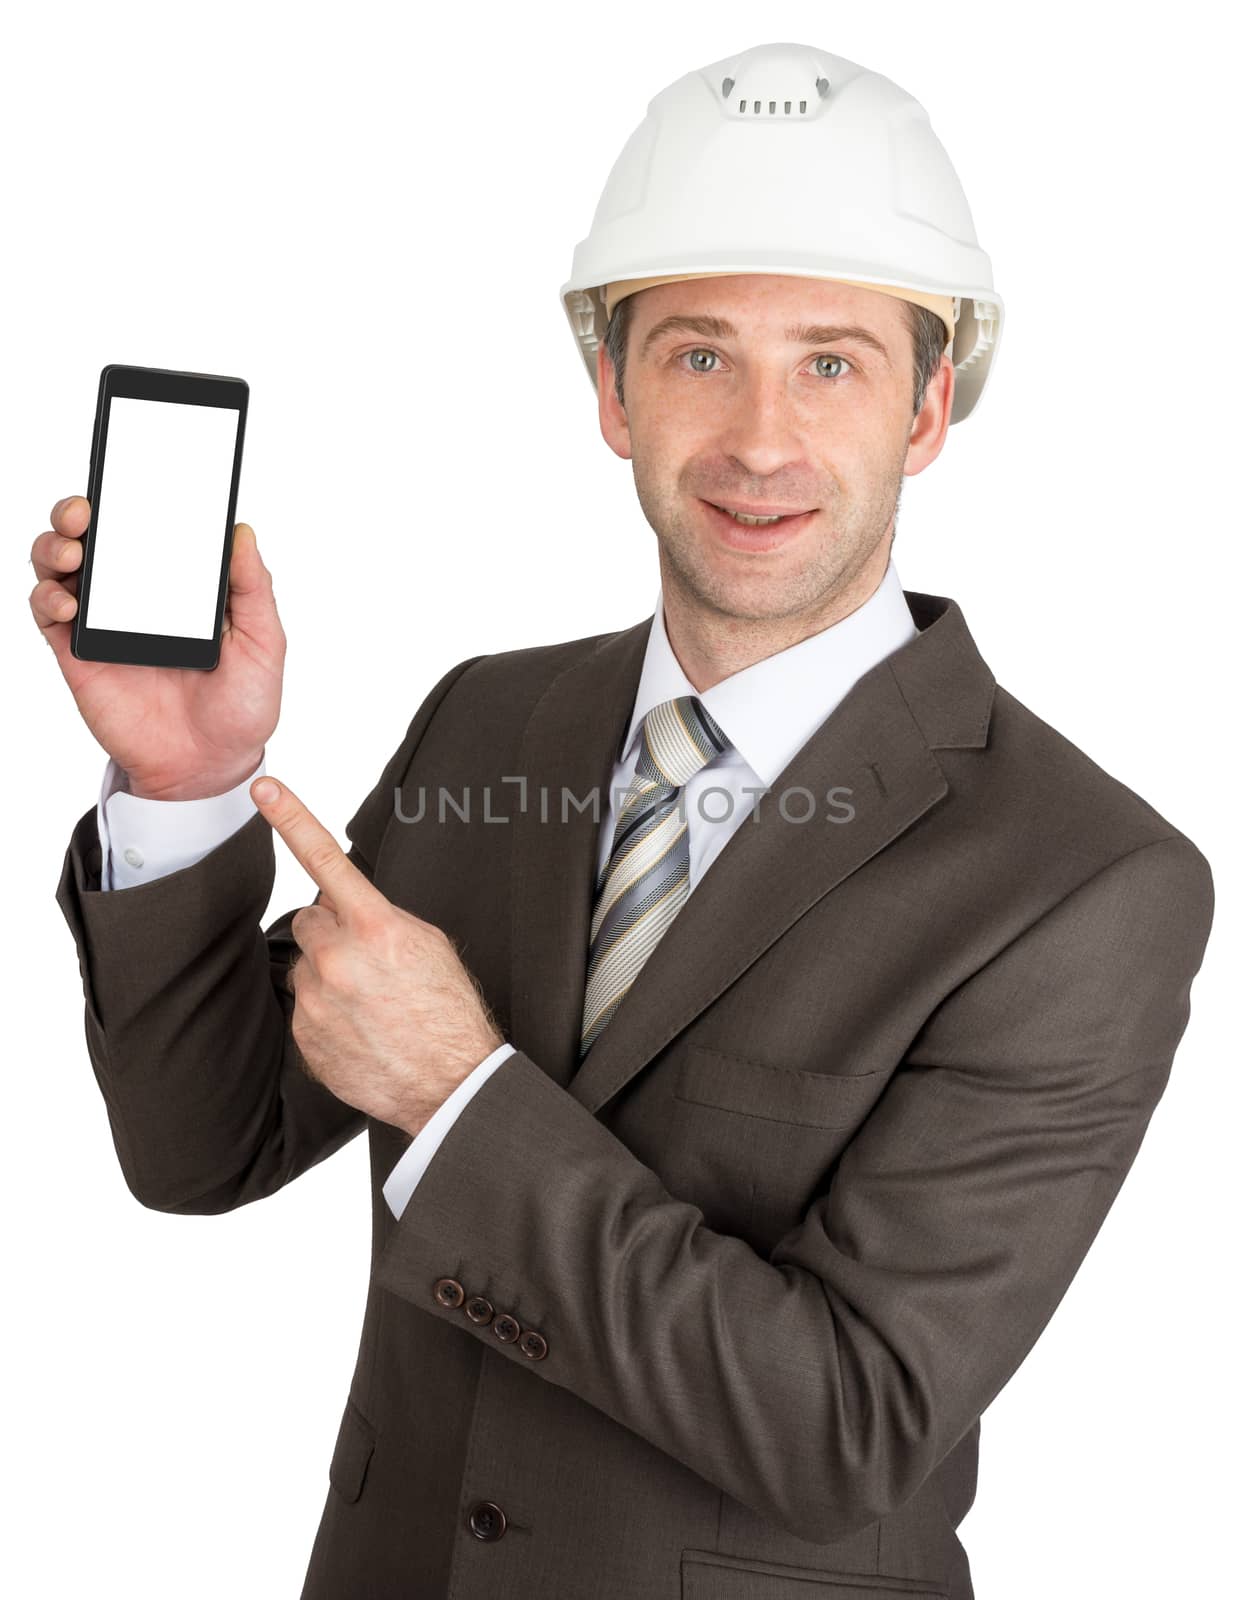 Smiling businessman in helmet showing mobile with blank screen isolated on white background